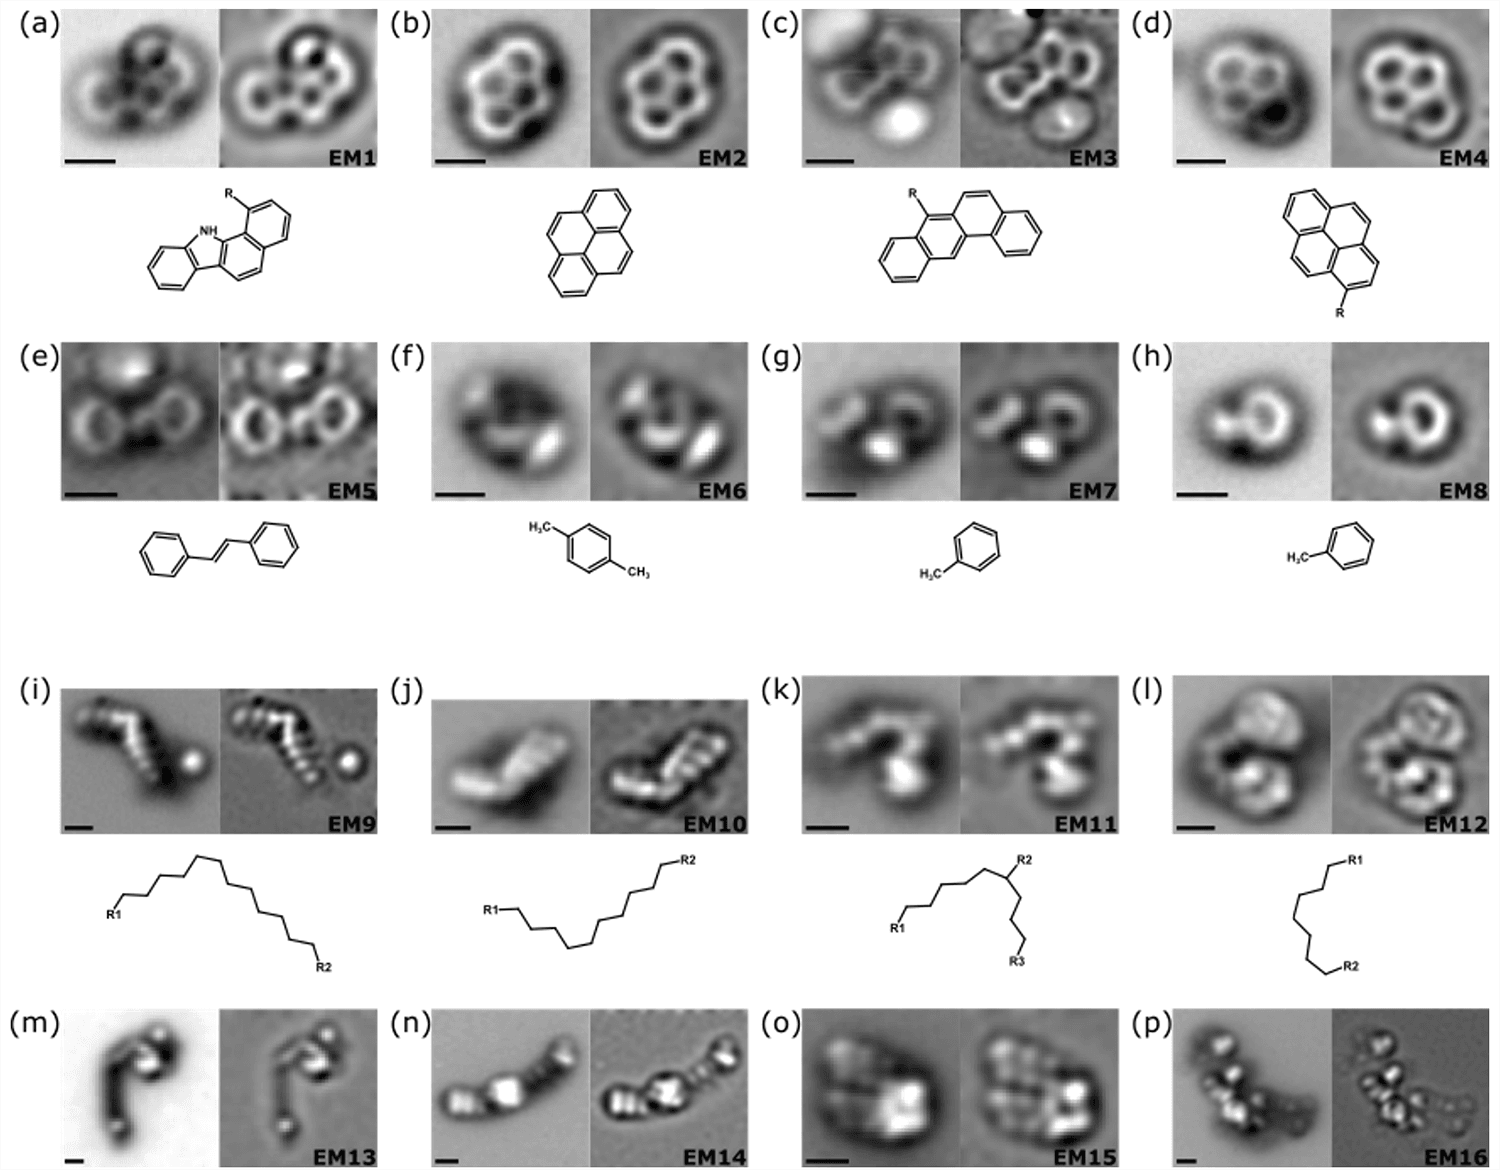 Molecules imaged from the Murchison extract